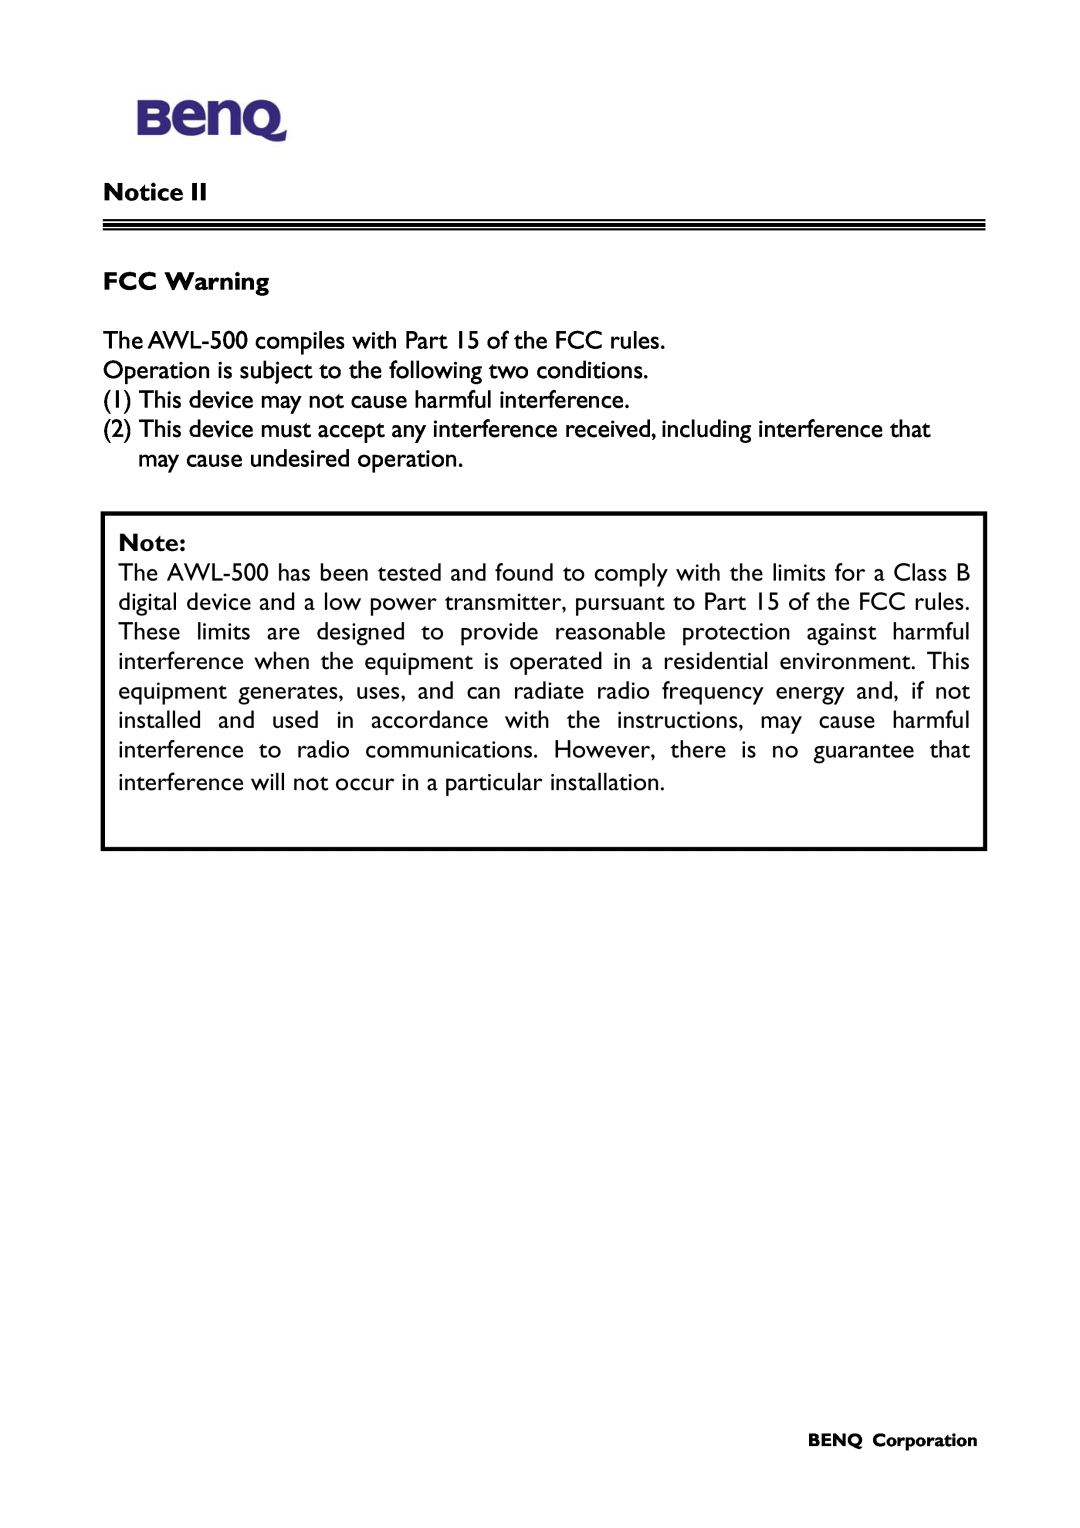 BenQ FCC Warning, The AWL-500 compiles with Part 15 of the FCC rules, This device may not cause harmful interference 